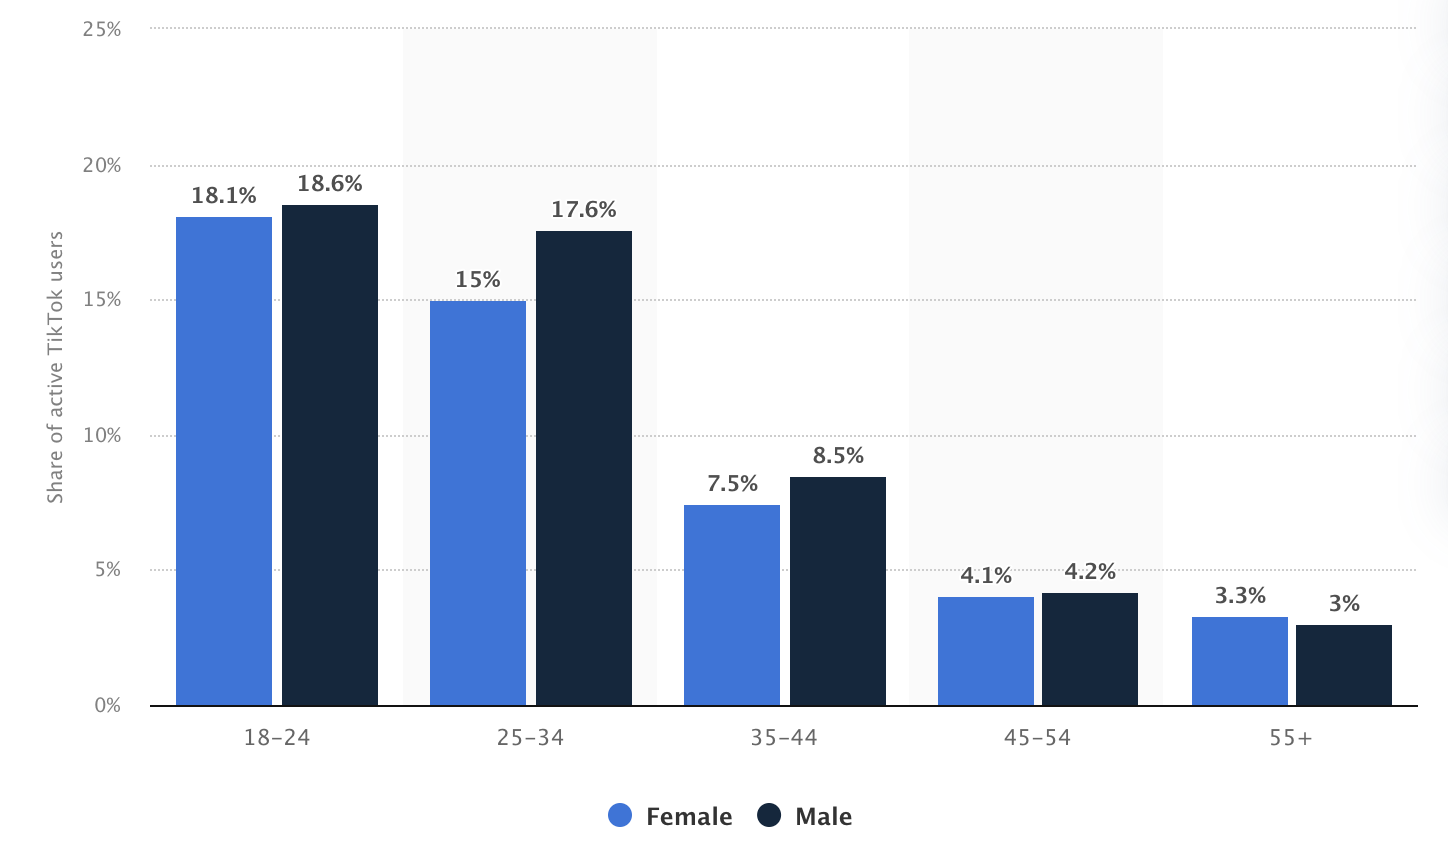 Share of active TikTok users by age and gender